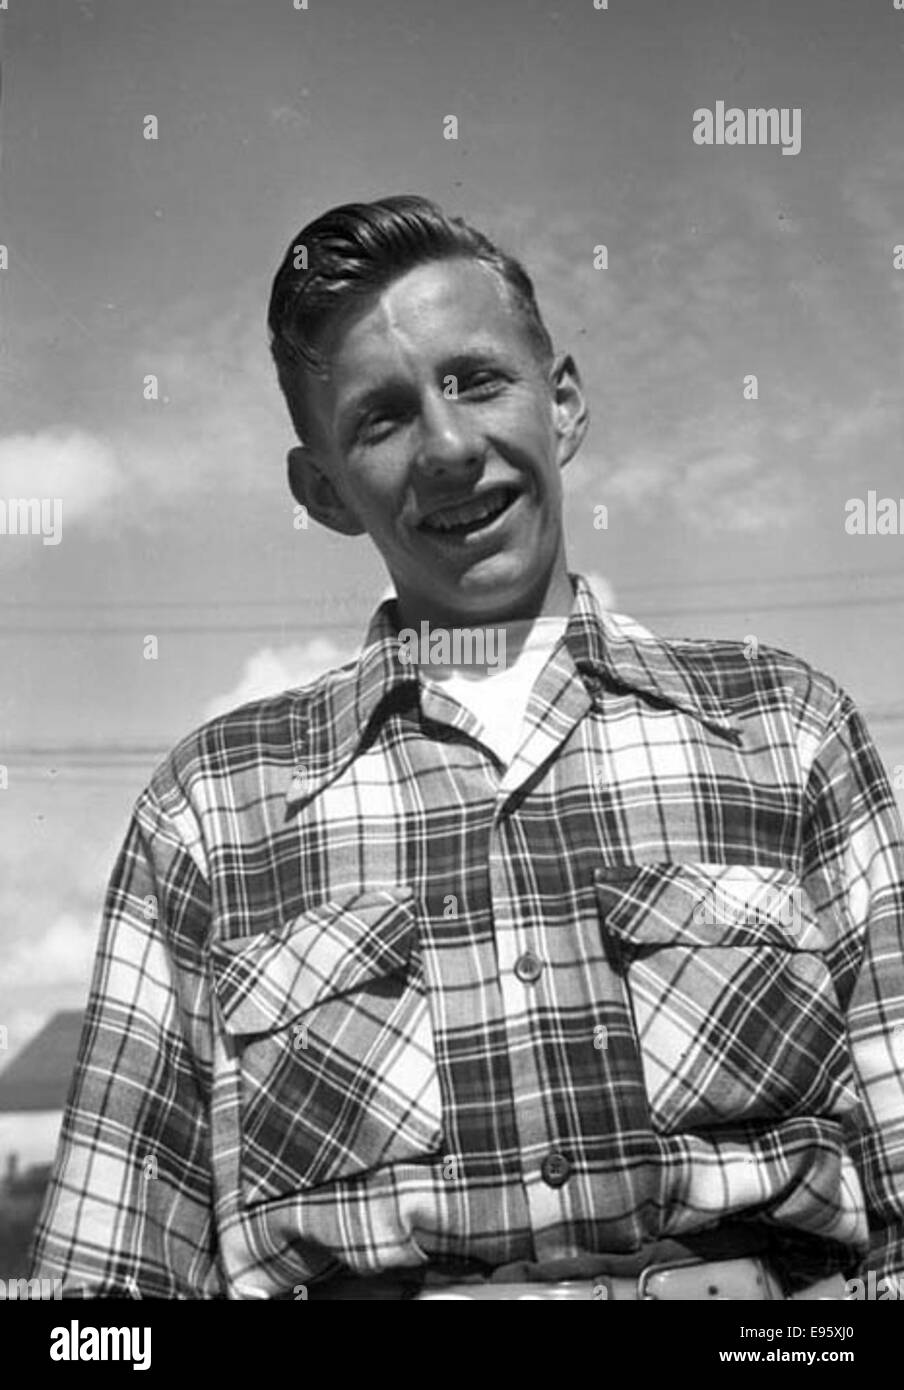 A young man smiles at the camera outdoors. 13 June 1948 21/4 x 31/4 negative This is one of 54 photos in the album “Fort Macleod’s Anonymous”. Most are shot in Fort Macleod, Alberta in the late 1940s. The donor o Stock Photo